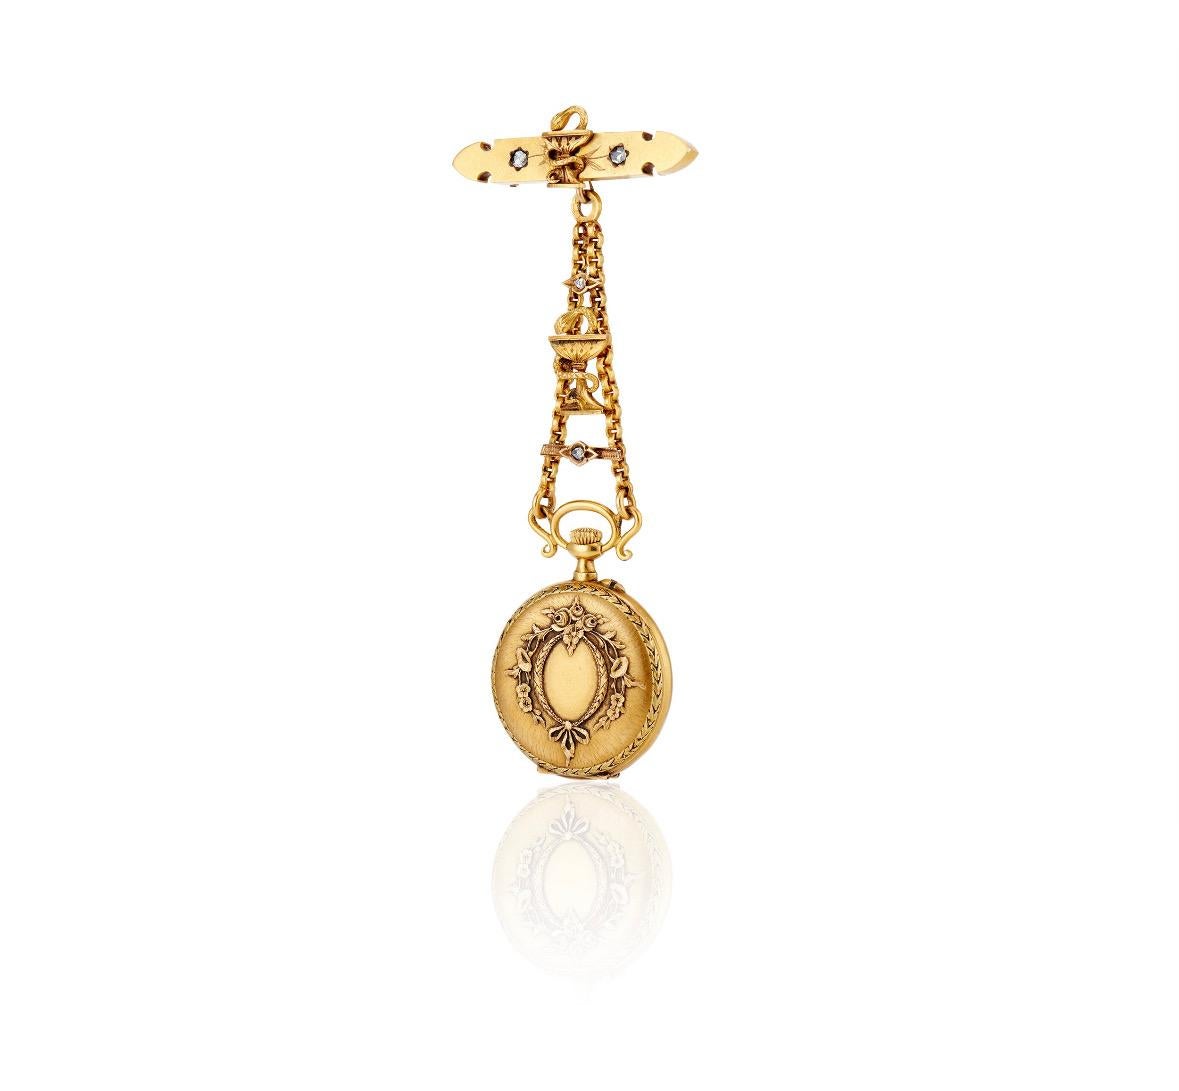 This exceptional 18k bicolor French pendant watch is suspended by a graduated banner, elaborately decorated by a Bowl of Hygieia centered between two twinkling rose-cut diamonds. This banner attaches to a small 1 9/16